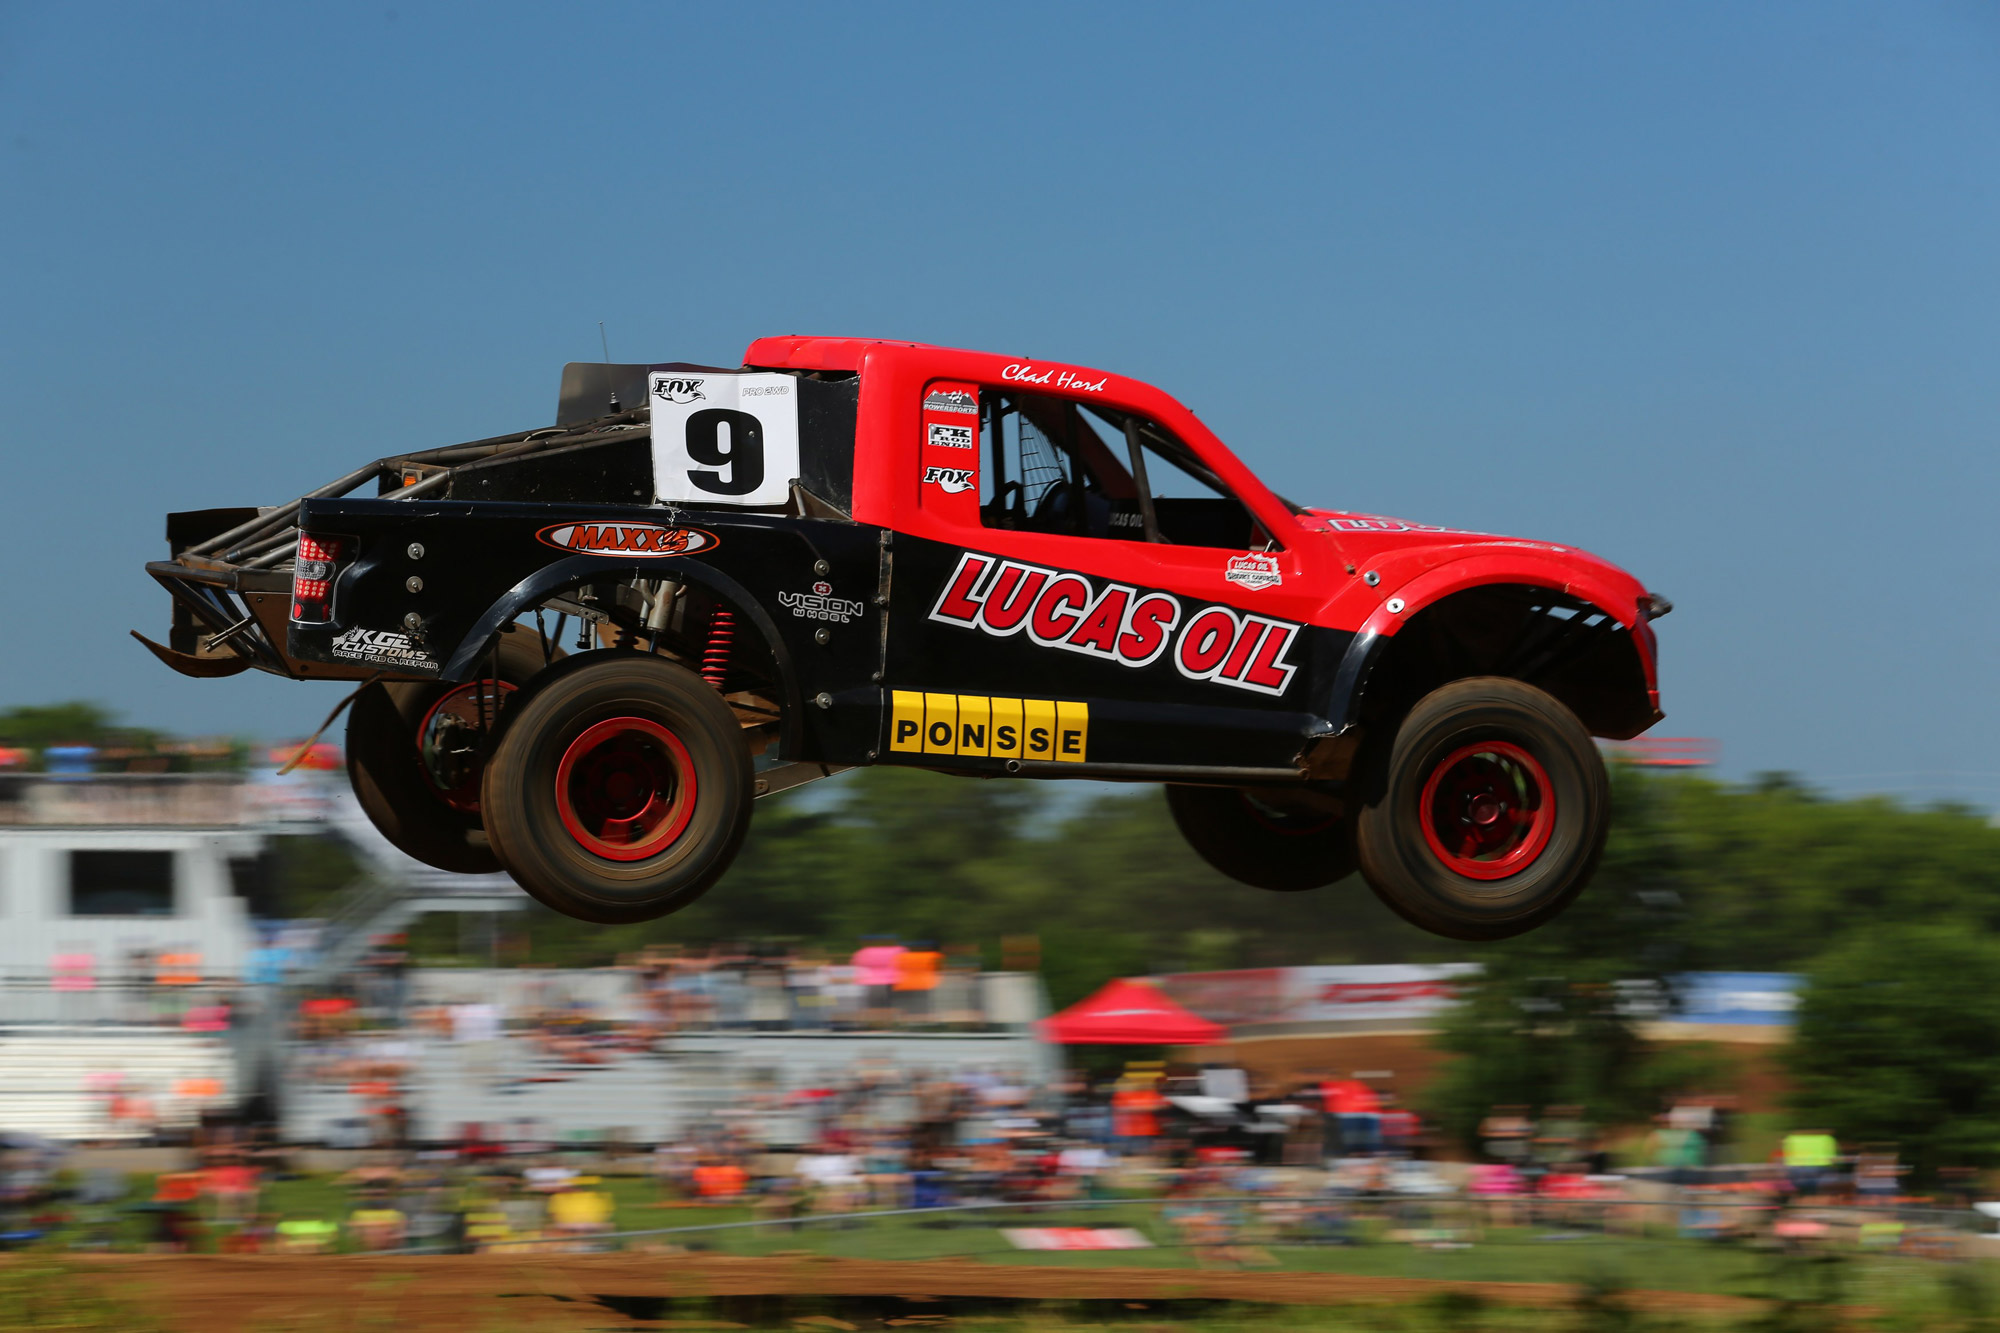 Six Wins for Maxxis at Loorrs’ Midwest Short Course Rounds 3 & 4